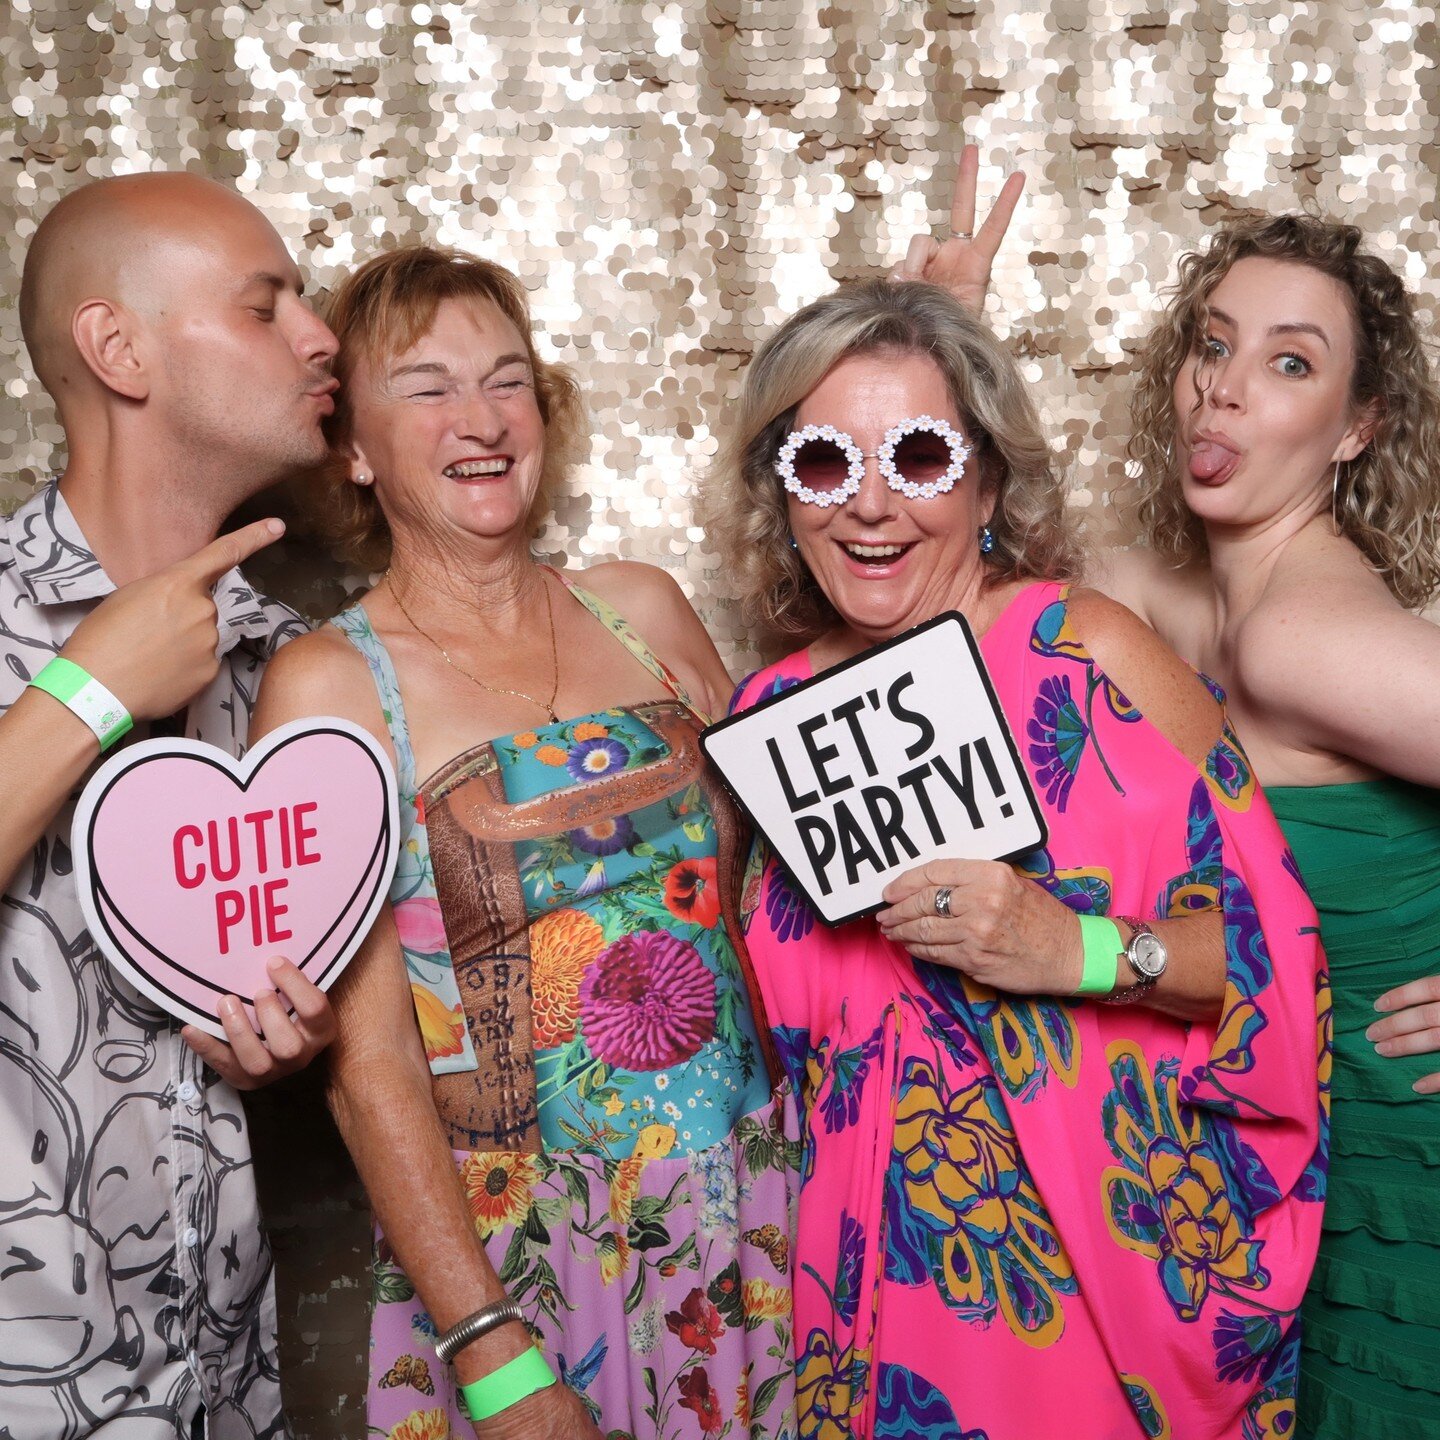 Age ain't nothin' but a number in our photo booth! This crew proves that fun knows no bounds. Look at those smiles! Let's Party vibes for everyone! ✨ #photoboothfun #classicsnevergooutofstyle #makememories #goldcoastphotobooth #brisbanephotobooth. #b